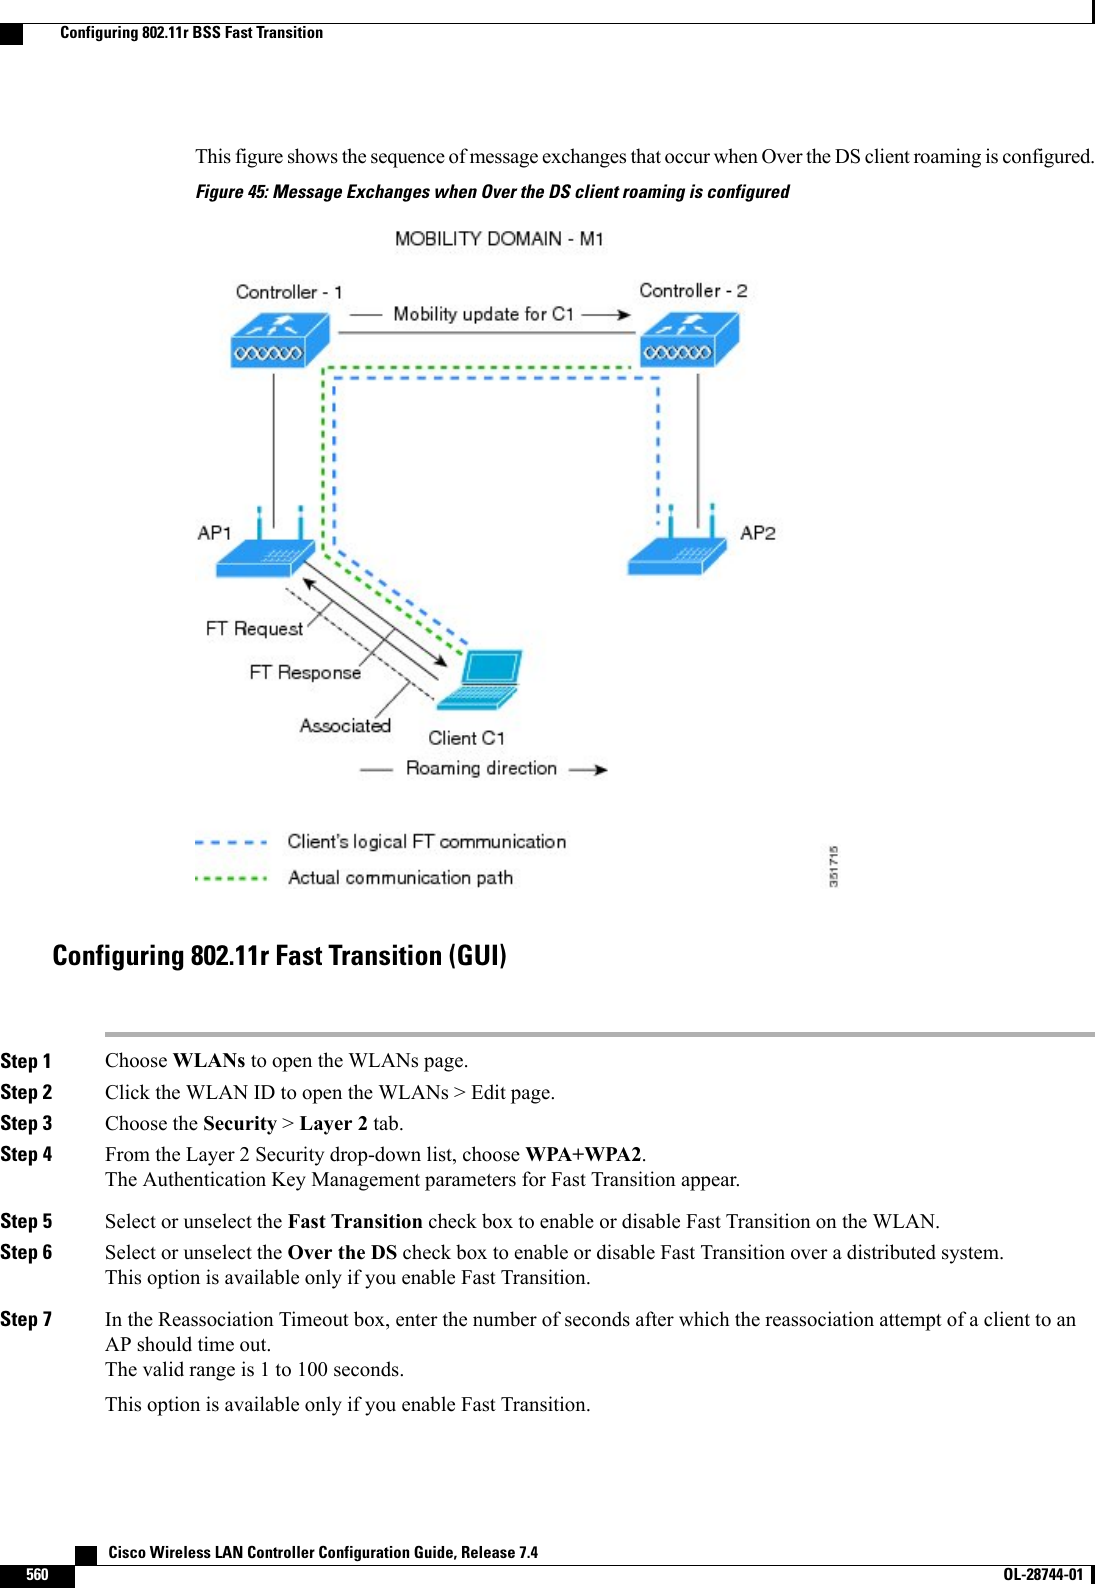 This figure shows the sequence of message exchanges that occur when Over the DS client roaming is configured.Figure 45: Message Exchanges when Over the DS client roaming is configuredConfiguring 802.11r Fast Transition (GUI)Step 1 Choose WLANs to open the WLANs page.Step 2 Click the WLAN ID to open the WLANs &gt; Edit page.Step 3 Choose the Security &gt;Layer 2 tab.Step 4 From the Layer 2 Security drop-down list, choose WPA+WPA2.The Authentication Key Management parameters for Fast Transition appear.Step 5 Select or unselect the Fast Transition check box to enable or disable Fast Transition on the WLAN.Step 6 Select or unselect the Over the DS check box to enable or disable Fast Transition over a distributed system.This option is available only if you enable Fast Transition.Step 7 In the Reassociation Timeout box, enter the number of seconds after which the reassociation attempt of a client to anAP should time out.The valid range is 1 to 100 seconds.This option is available only if you enable Fast Transition.   Cisco Wireless LAN Controller Configuration Guide, Release 7.4560 OL-28744-01  Configuring 802.11r BSS Fast Transition